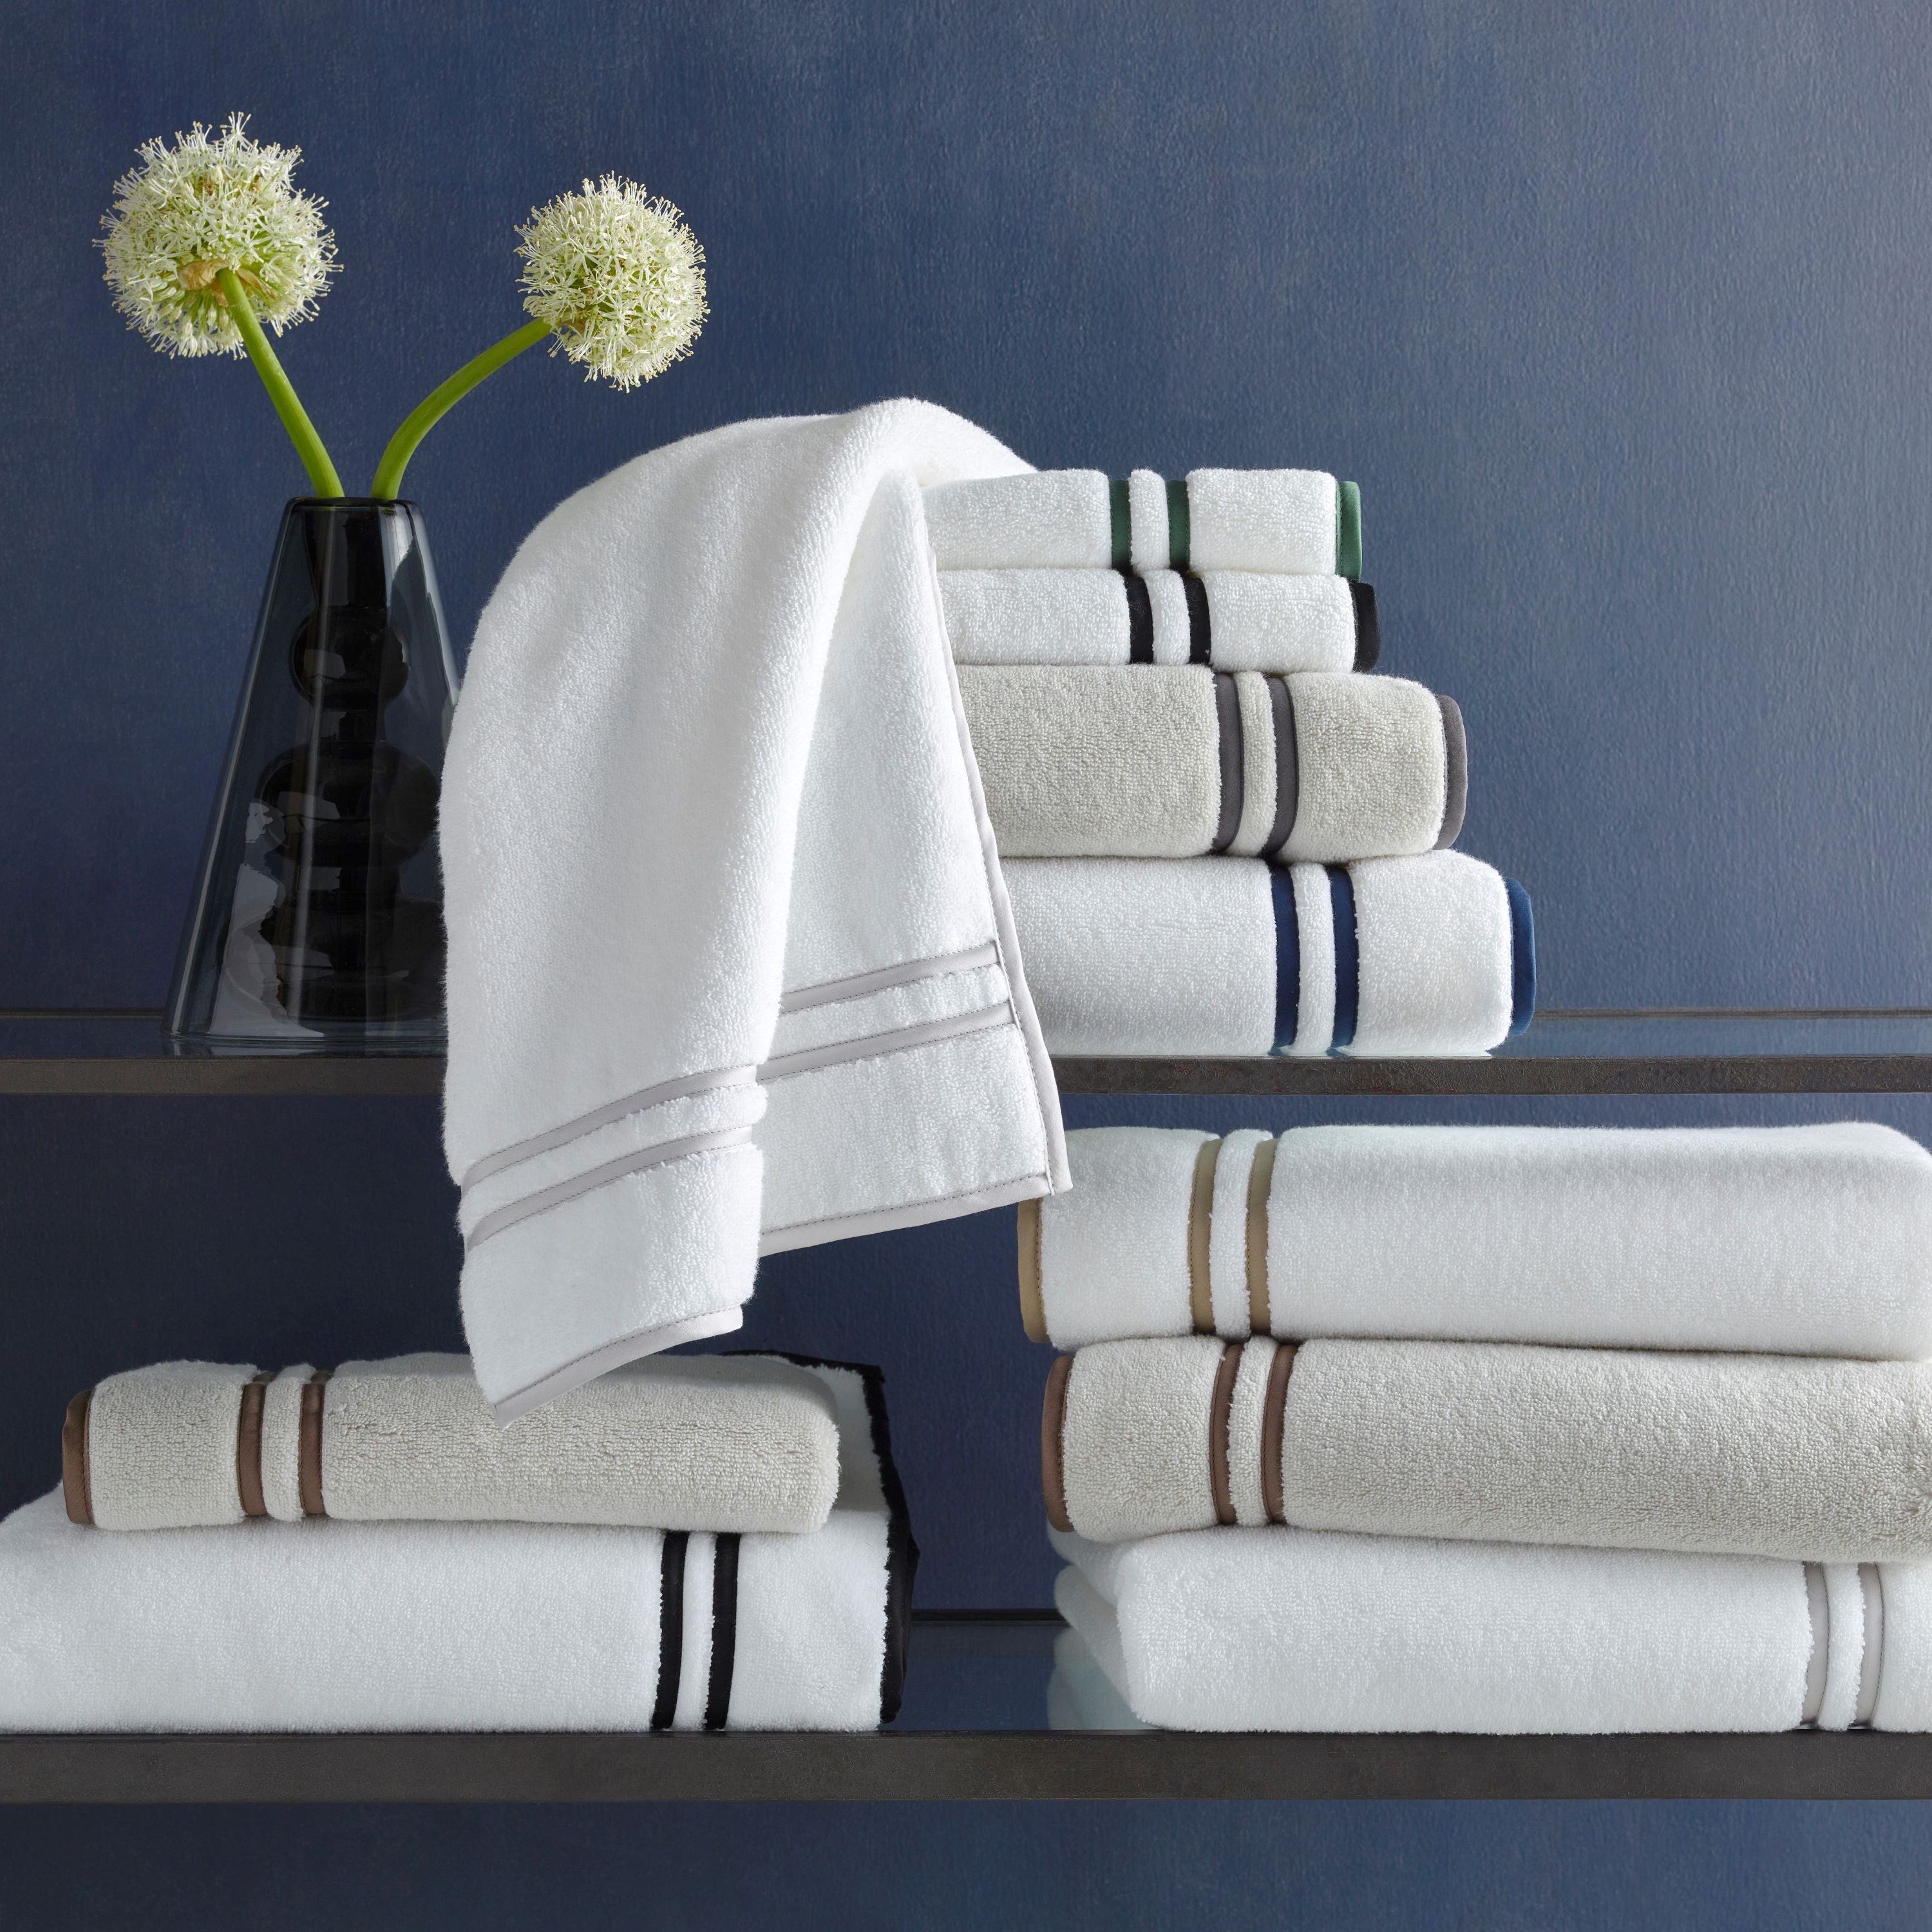 6 Piece Gray Diamond Bath Towel Set (2 Bath Towels, 2 Hand Towels and - The  Clean Store